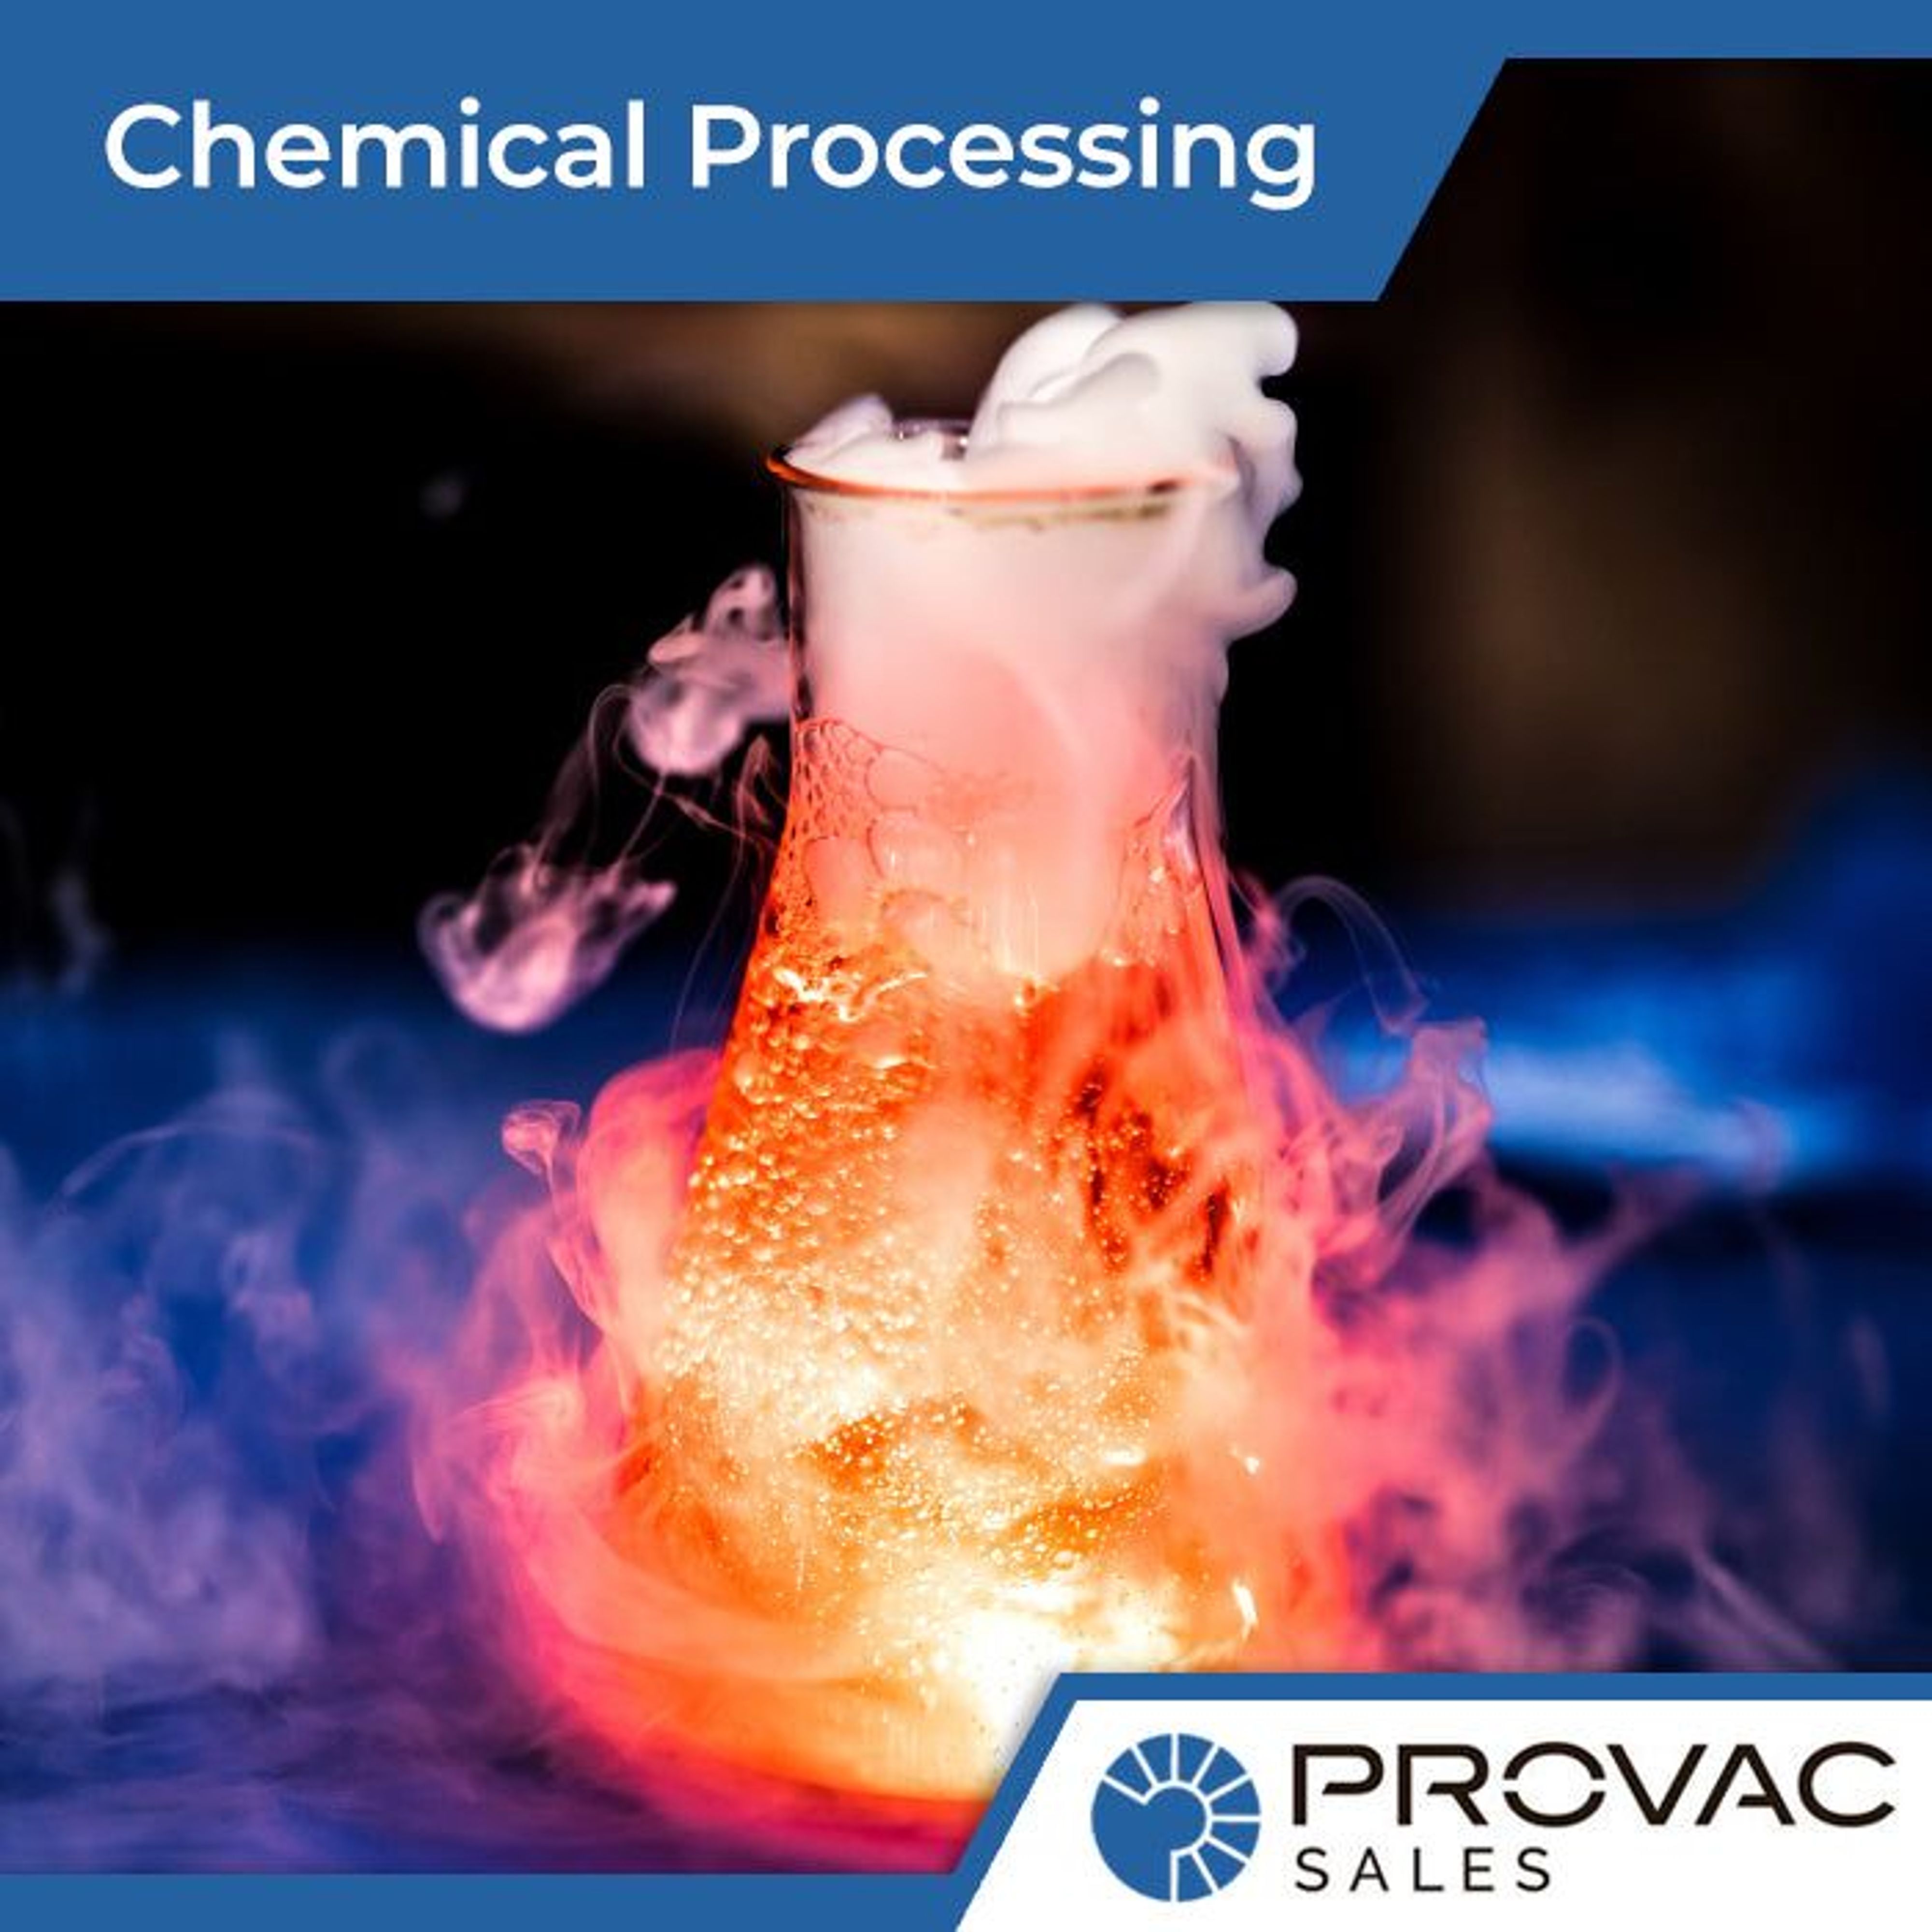 Chemical Processing Technology with Vacuum Pumps Background